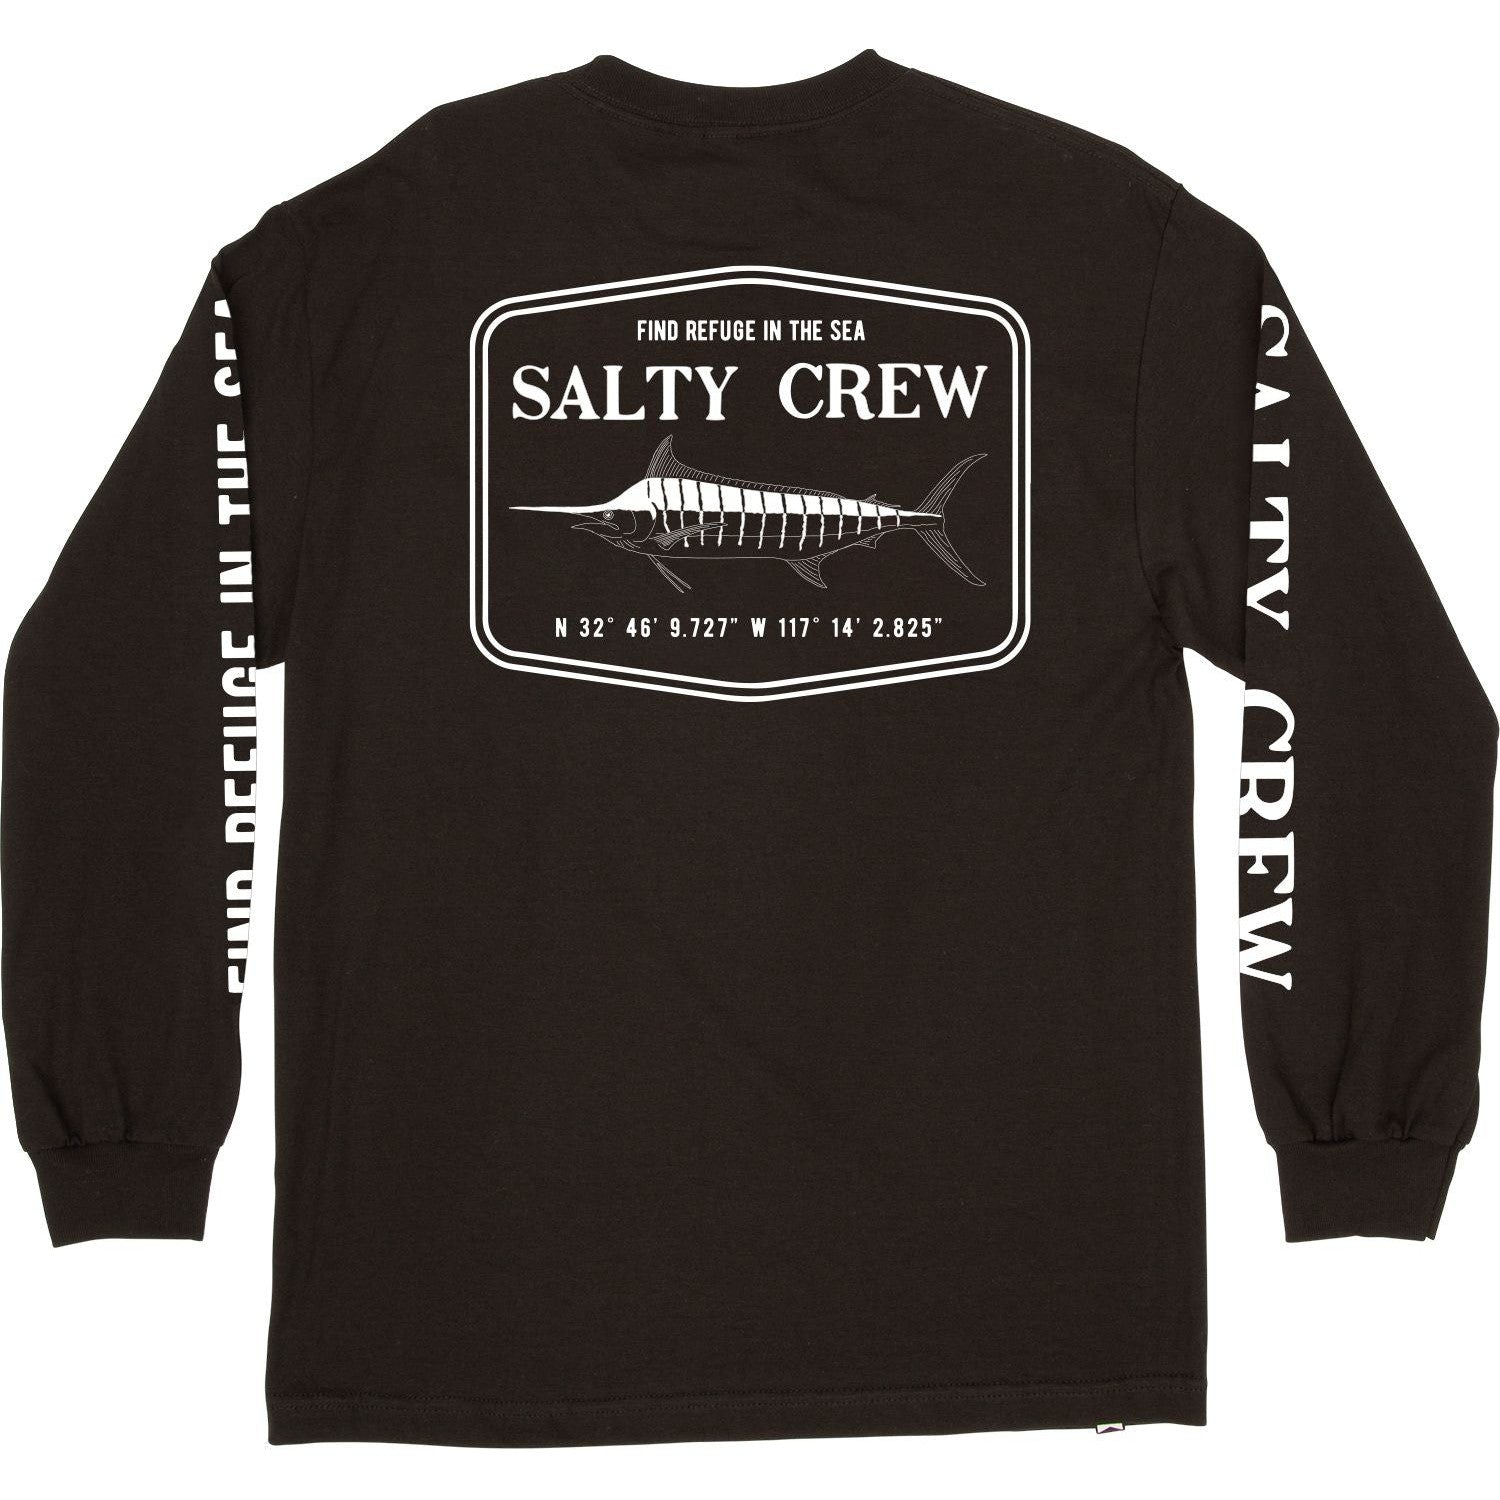 Salty Crew Stealth Long Sleeve Shirt - Tackle Express